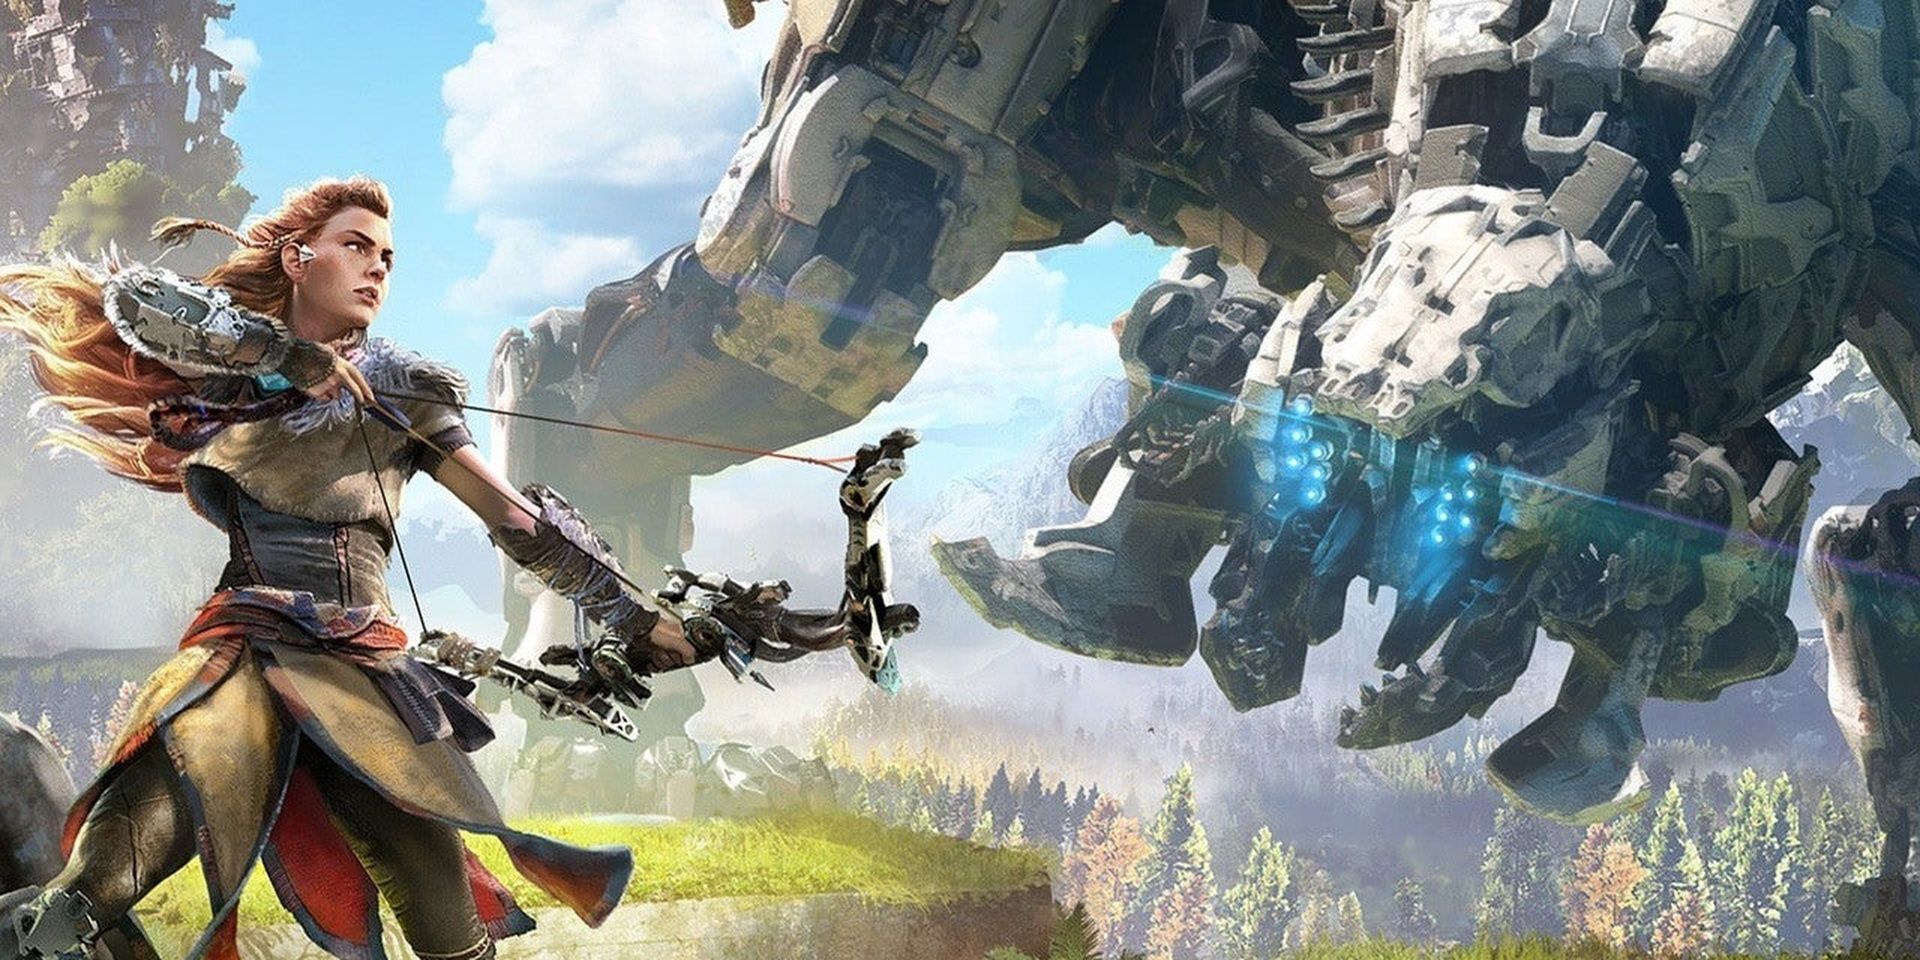 Picture of Aloy from Horizon Zero Dawn fighting a big robot